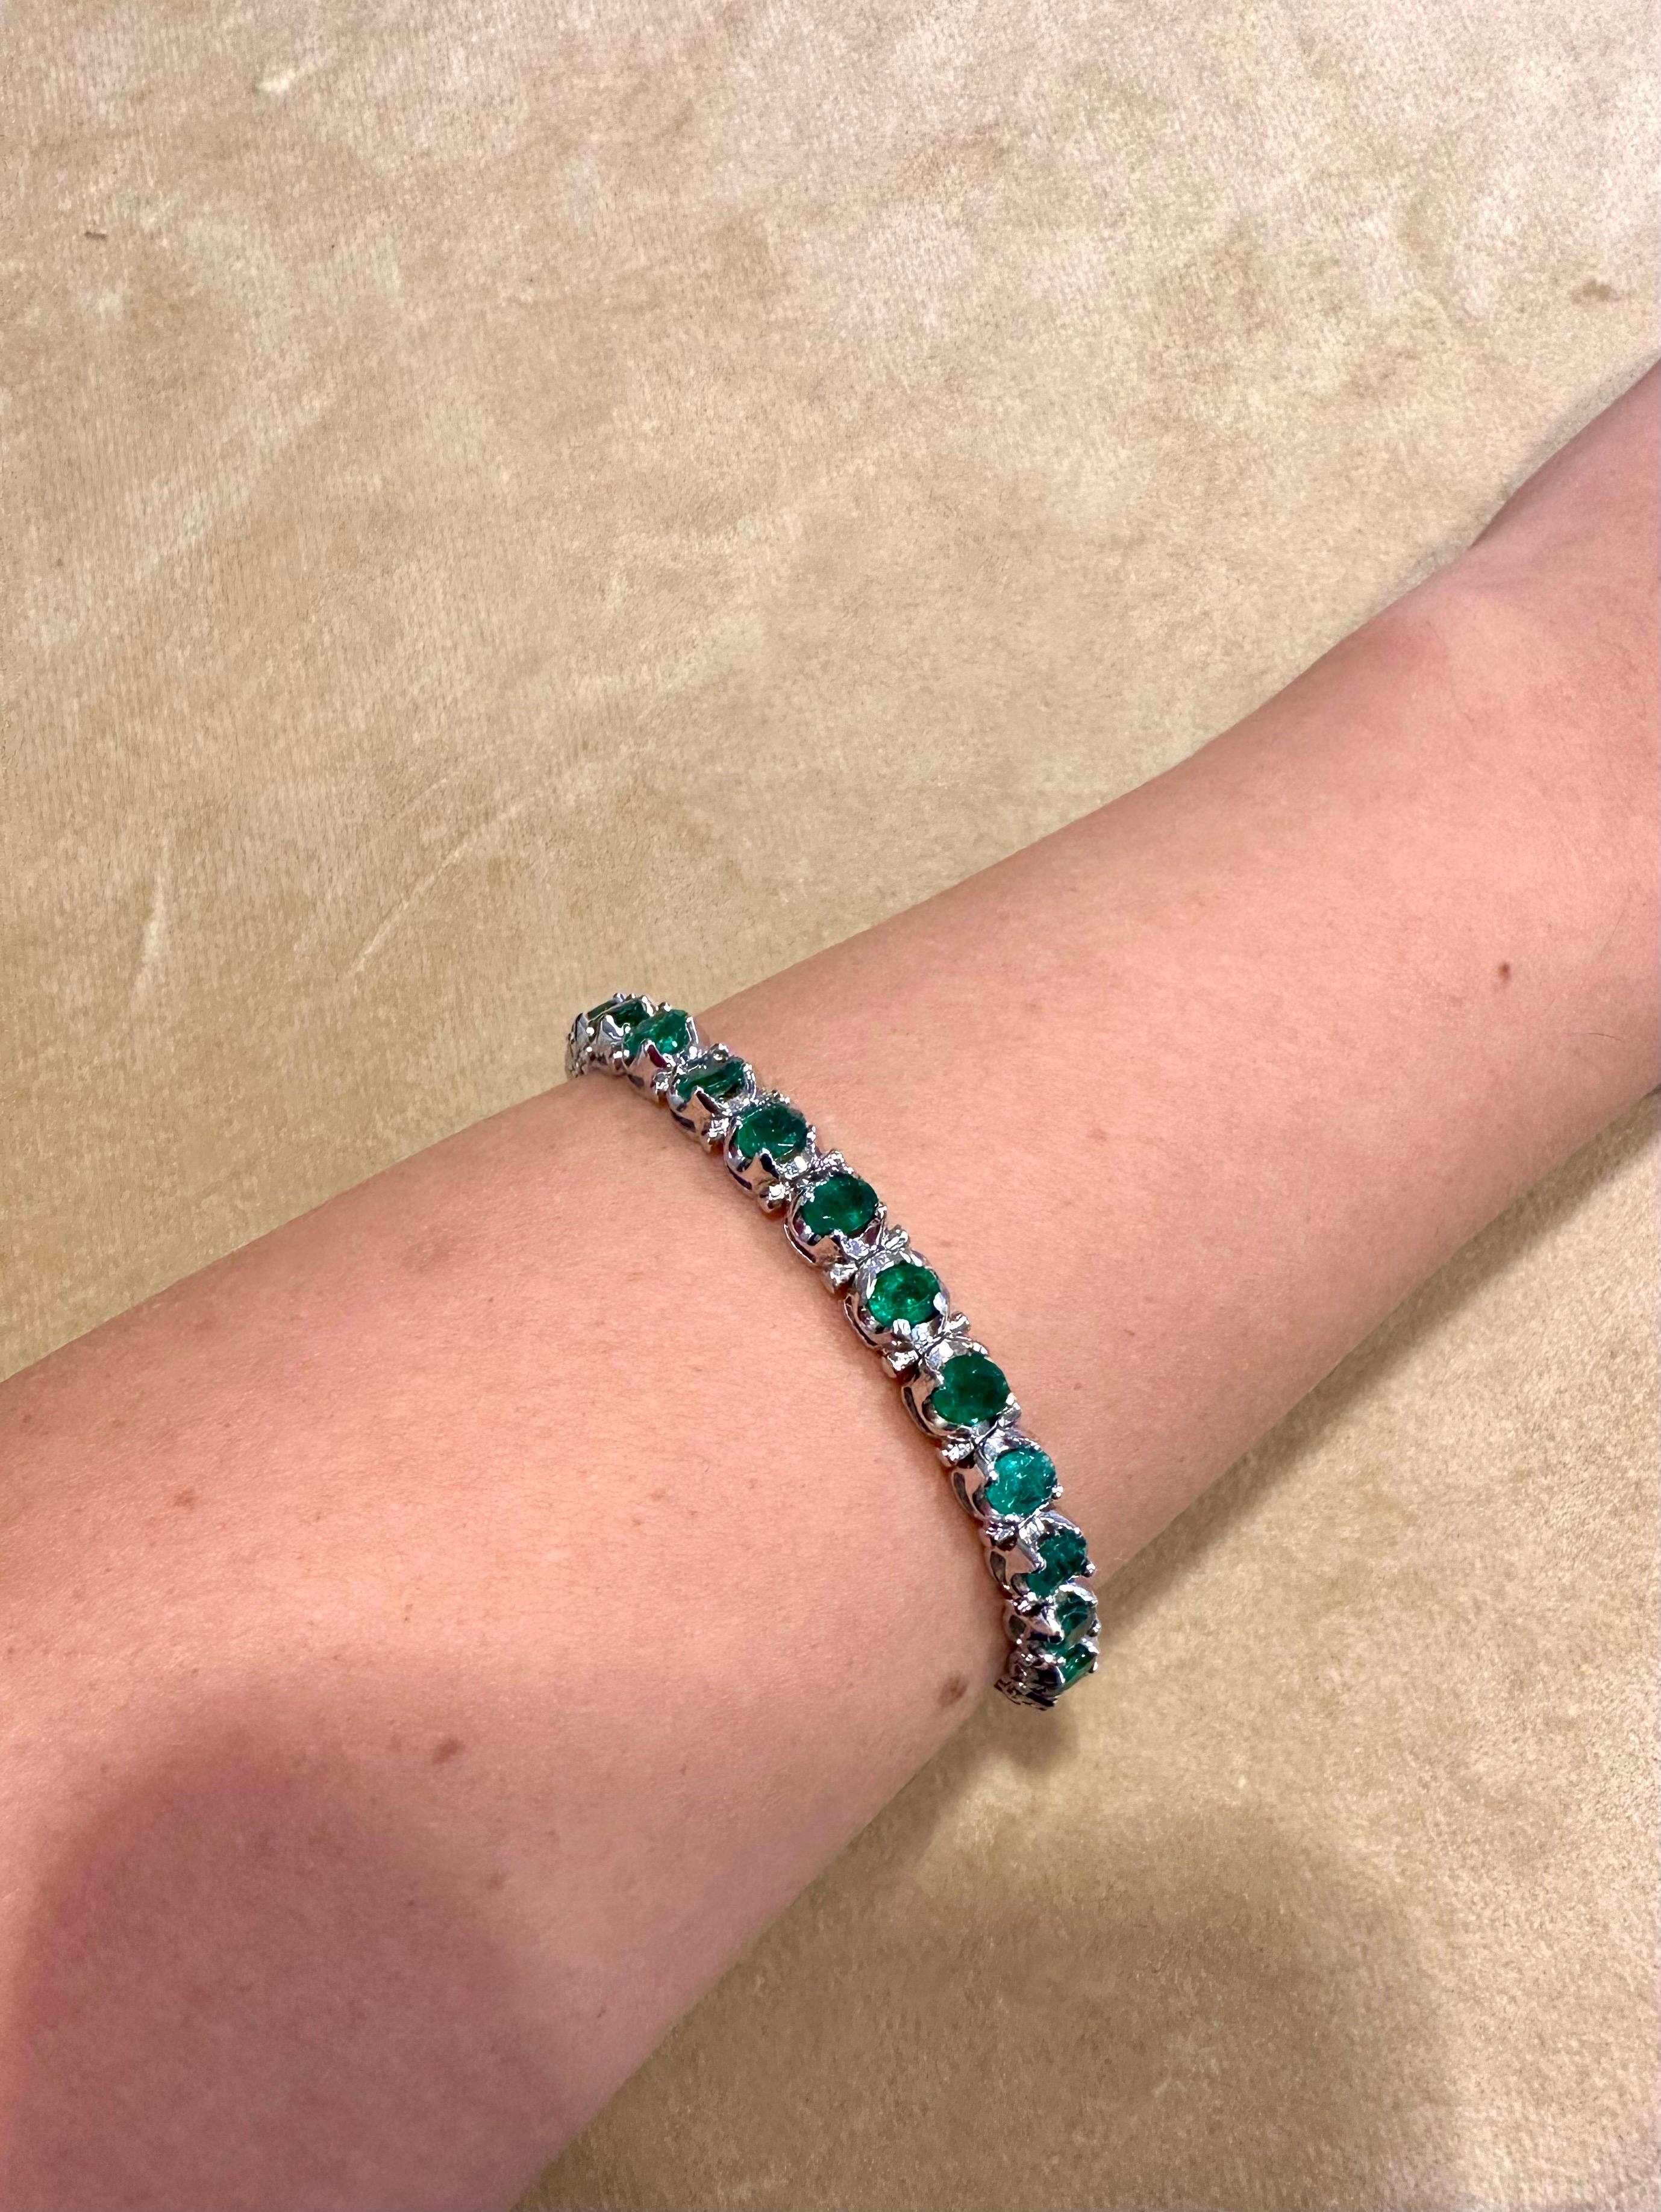 Introducing the exquisite Approximately 10 Ct Natural Oval Brazilian Emerald Tennis Bracelet in Platinum, measuring 7.5 inches in length. This stunning bracelet showcases 28 oval emeralds with a total approximate weight of 10 carats, creating a